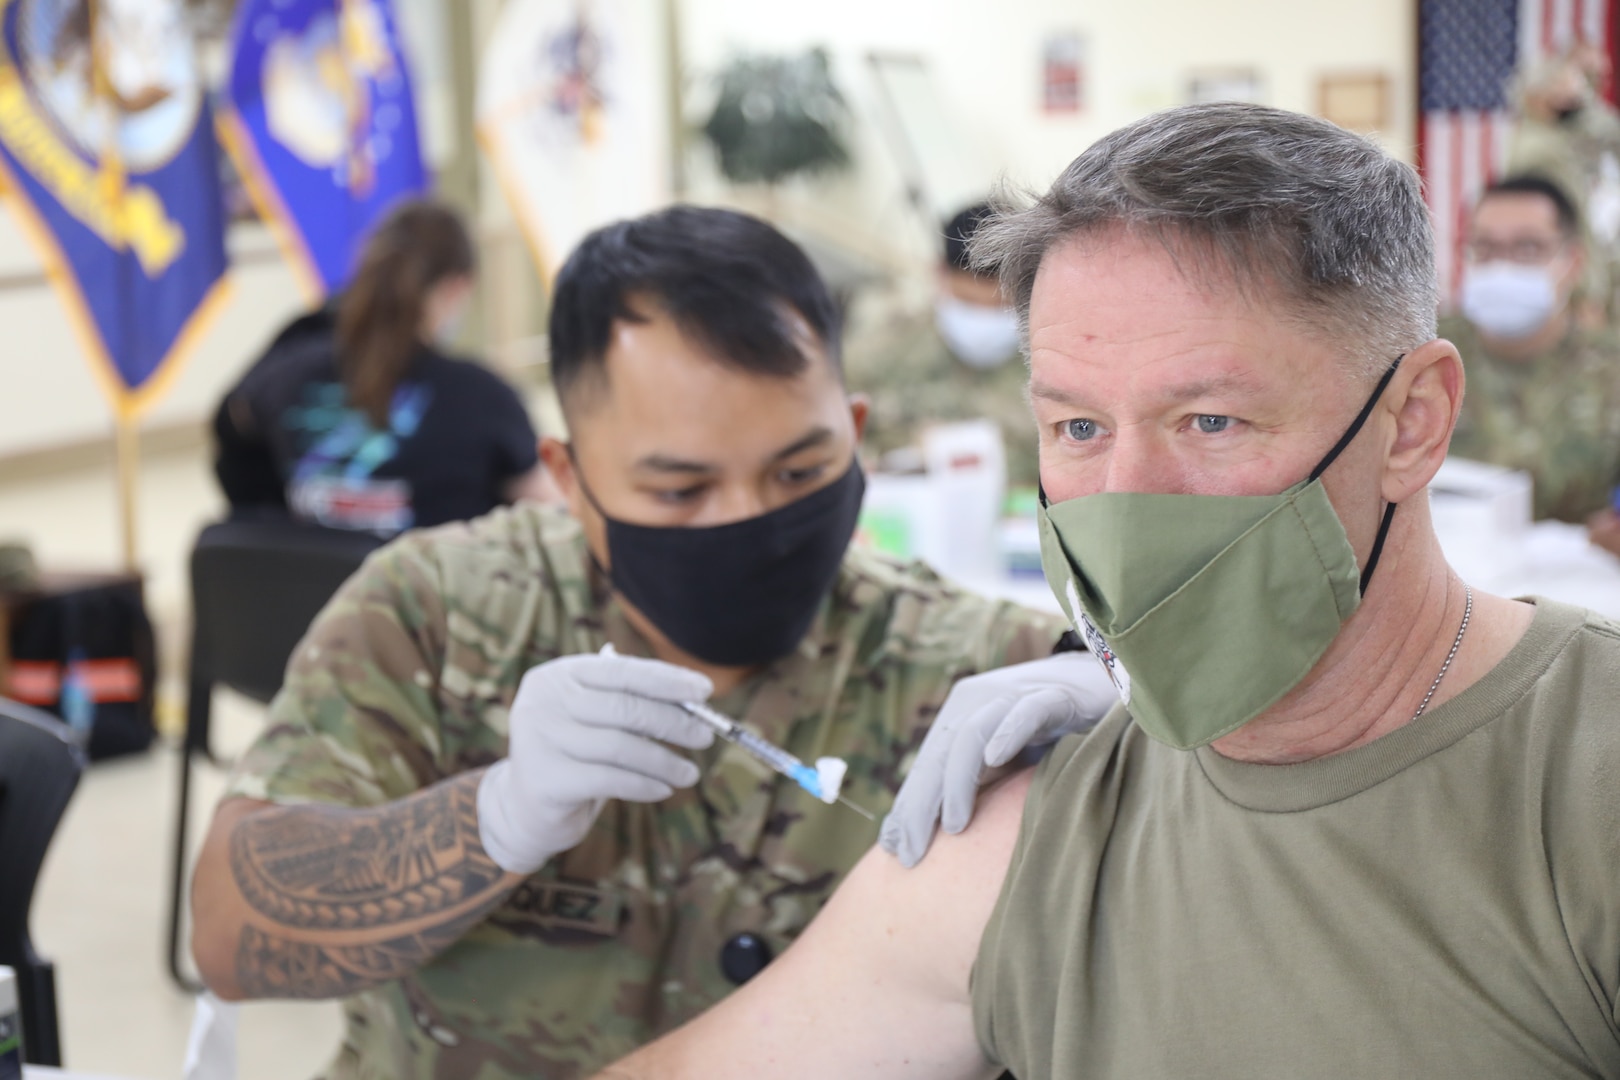 Spc. Vincebryan Marquez, healthcare specialist, 228th Combat Support Hospital, administers the Moderna COVID-19 vaccine to Lt. Col. Scott Gadberry, anesthesiologist, 228th Combat Support Hospital, at Camp Arifjan, Kuwait, Jan. 18, 2021. Camp Arifjan is utilizing a phased distribution of the vaccine, as specified by the Department of Defense, beginning with medical personnel and first responders.